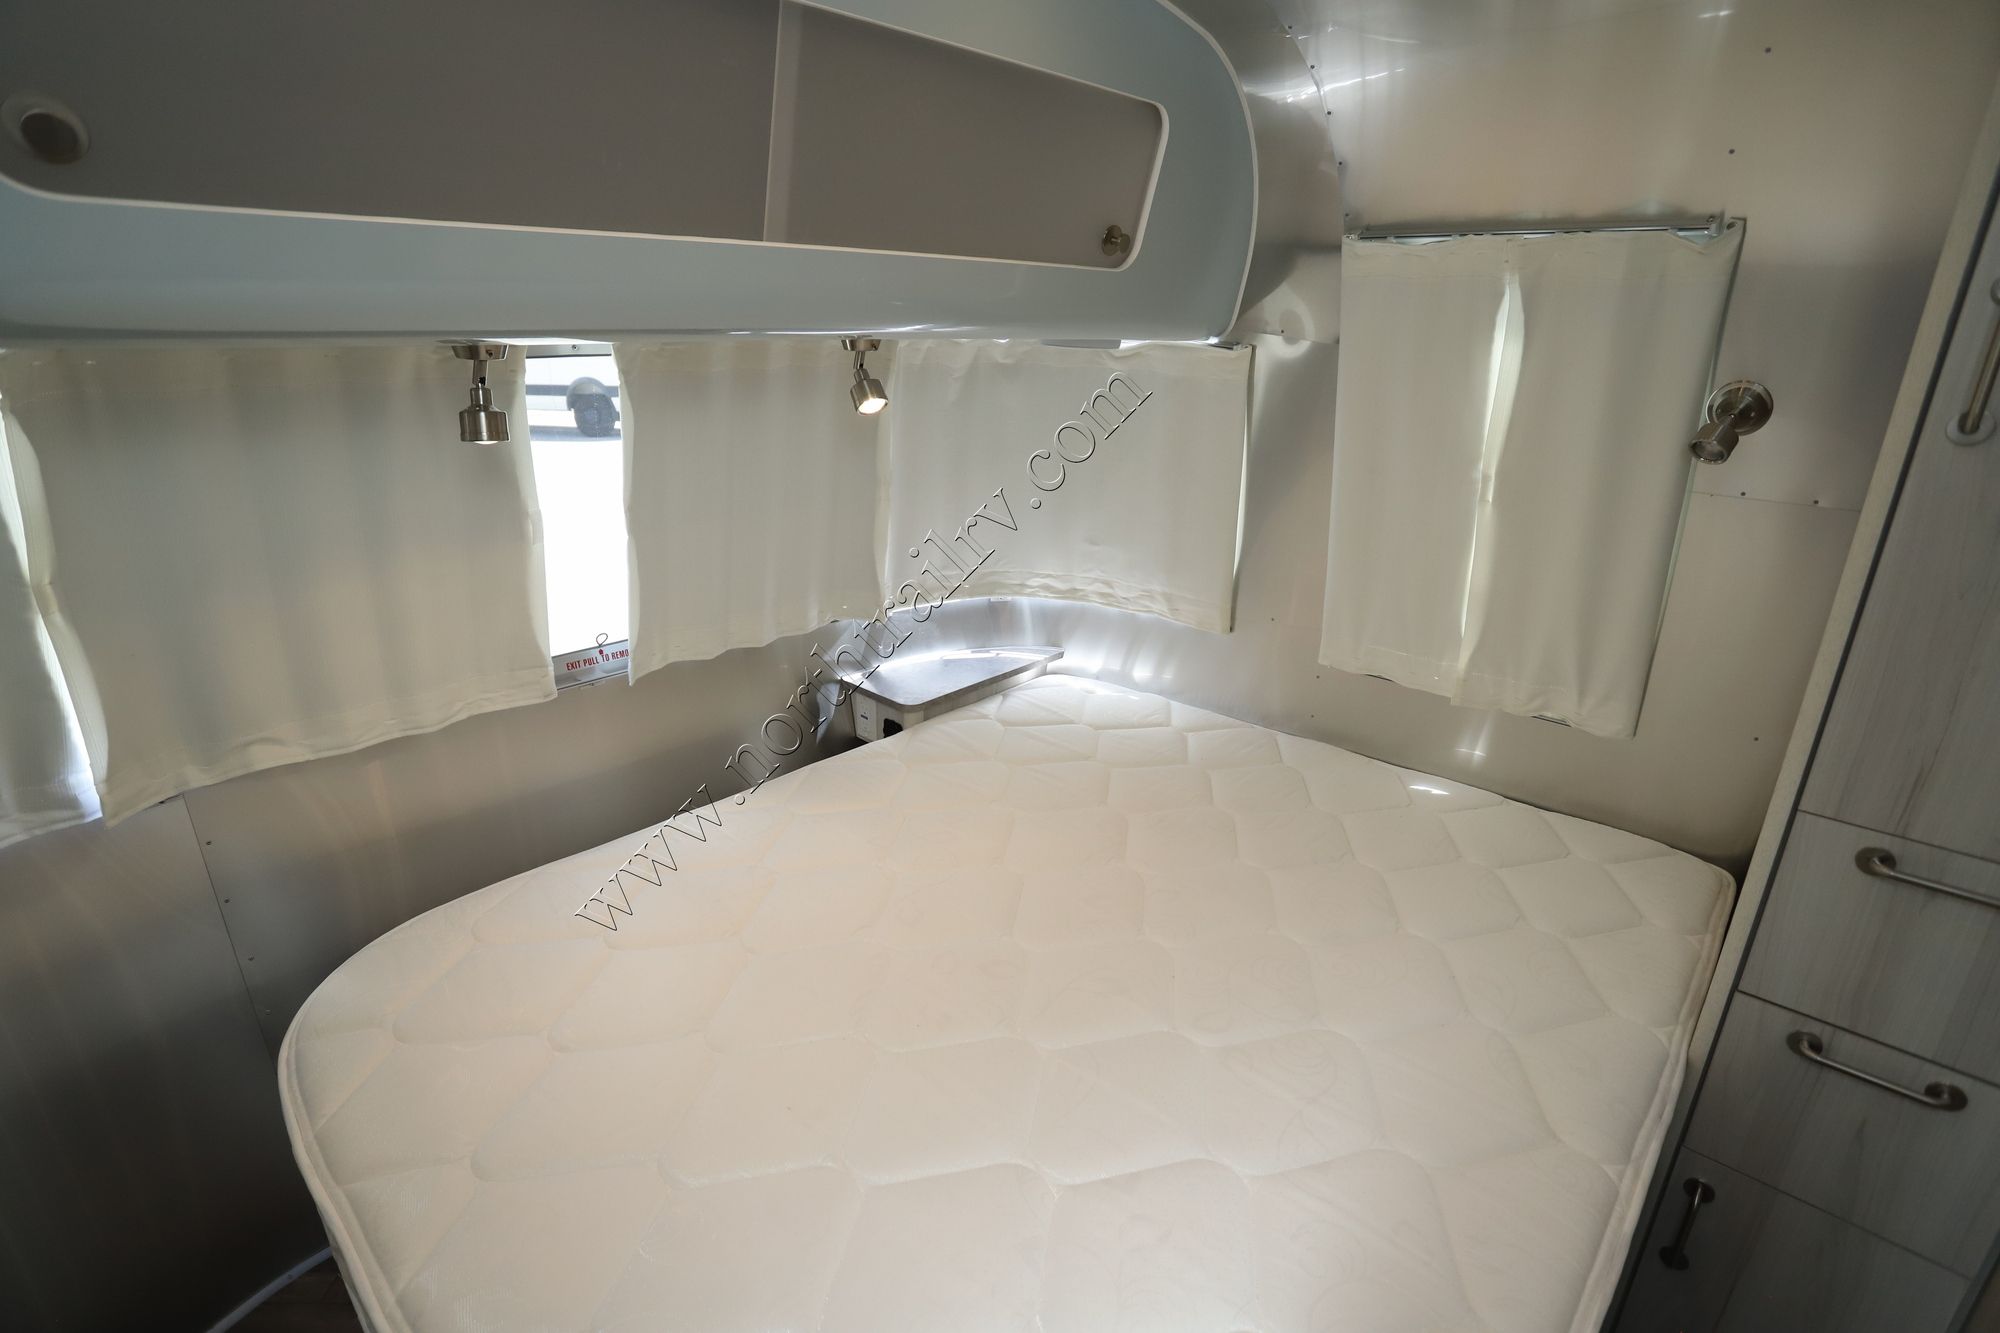 2022 Airstream International 25RB Travel Trailer Used  For Sale